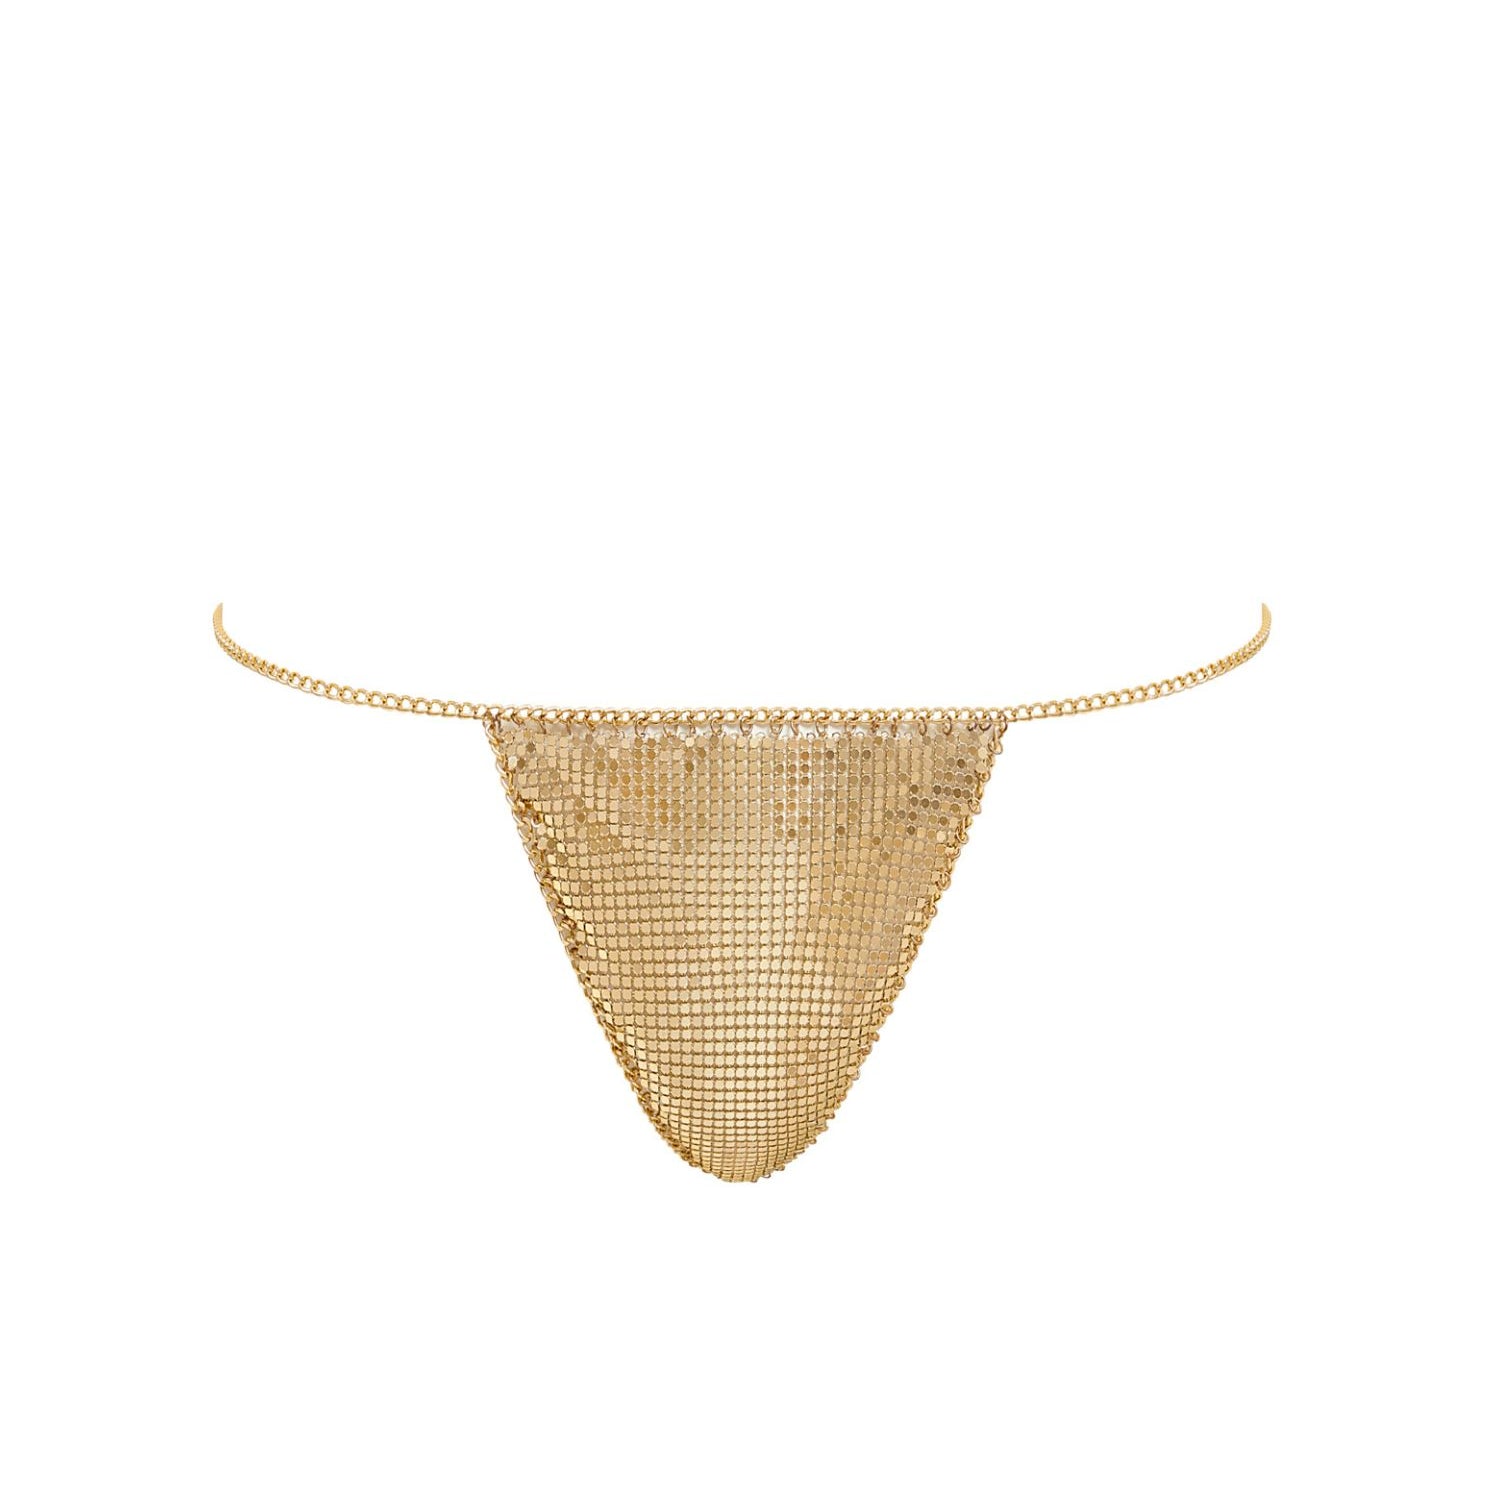 Bluebella CYLA Chainmail Thong (Gold) | Avec Amour Sexy Lingerie